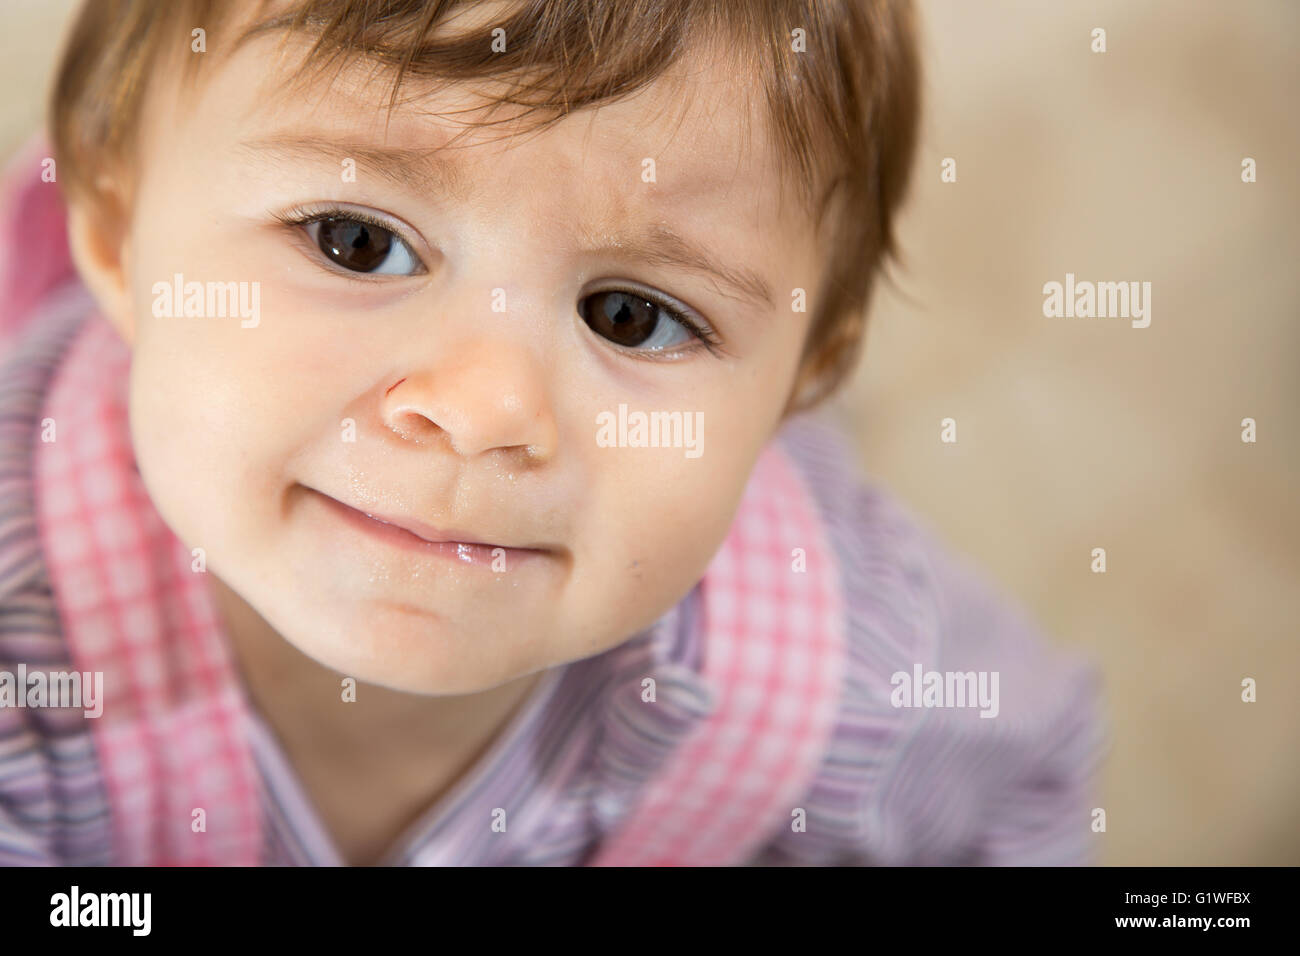 Close-up of cute one year old kid with brown eyes looking away sadly Stock Photo